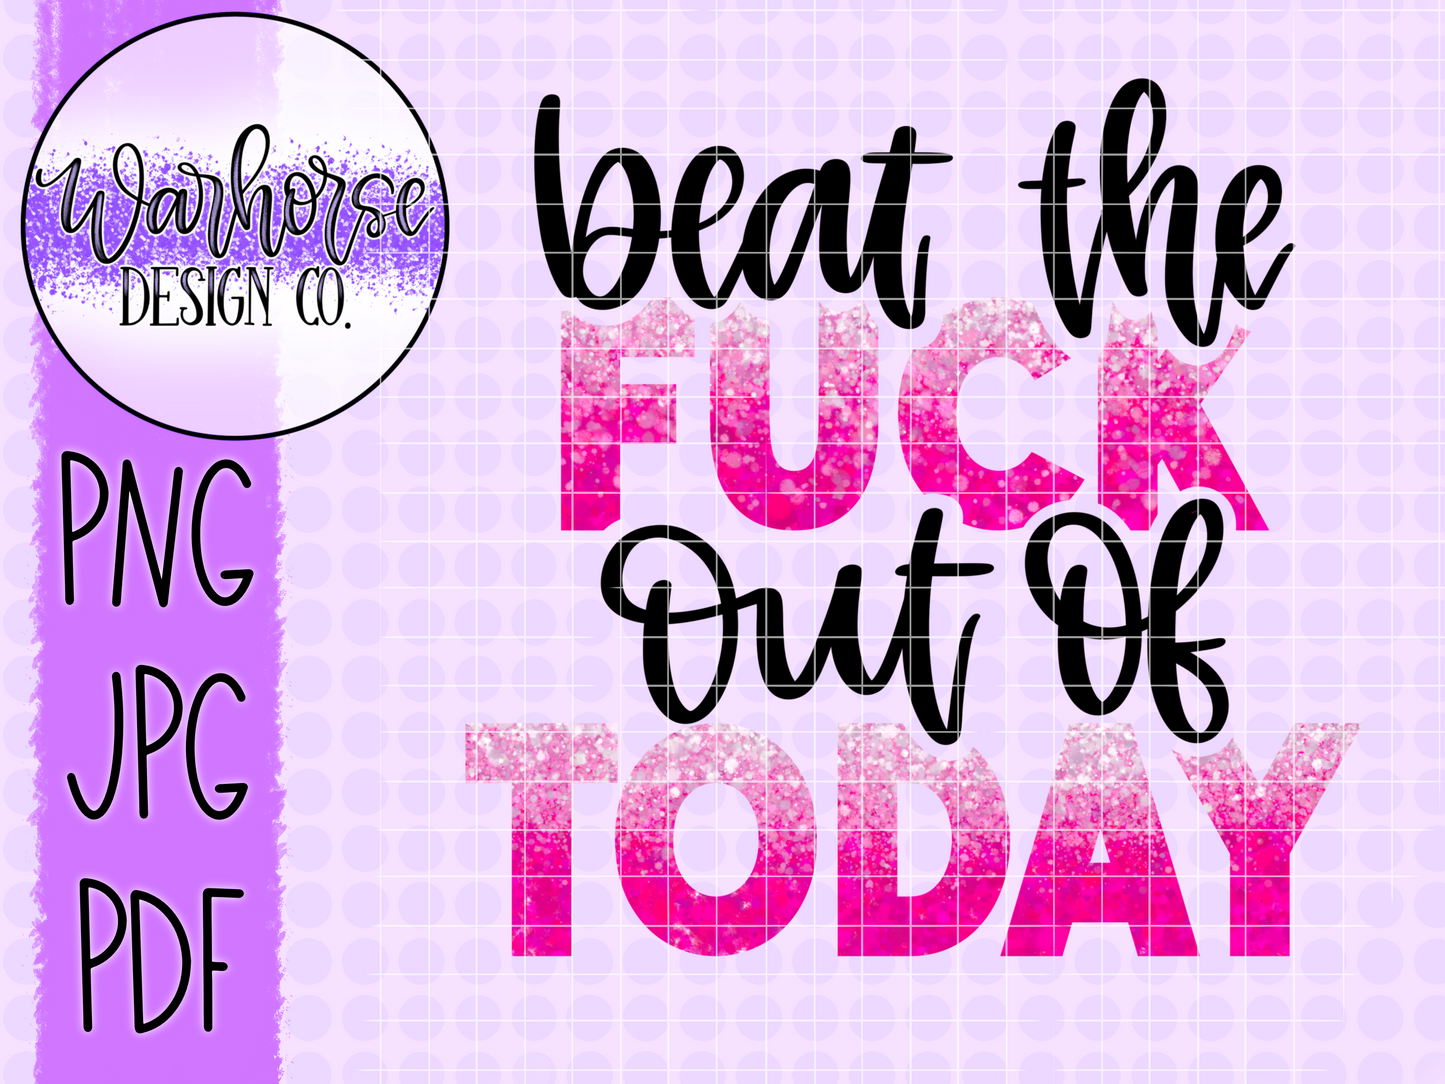 beat the fuck out of today PNG JPEG PDF